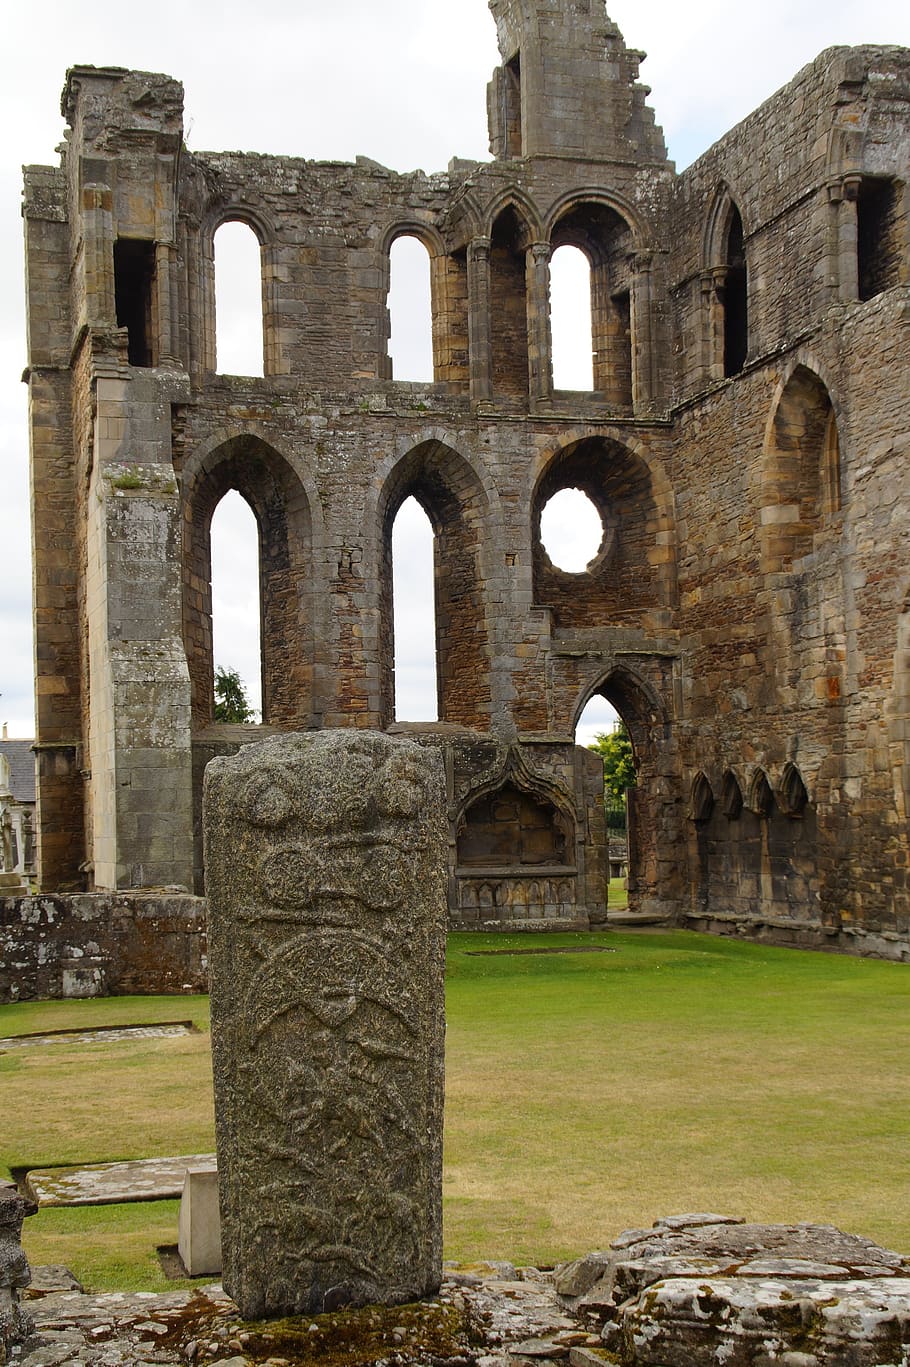 elgin, elgin cathedral, cathedral, ruin, picts, pictish stone, pictogram, historically, scotland, architecture